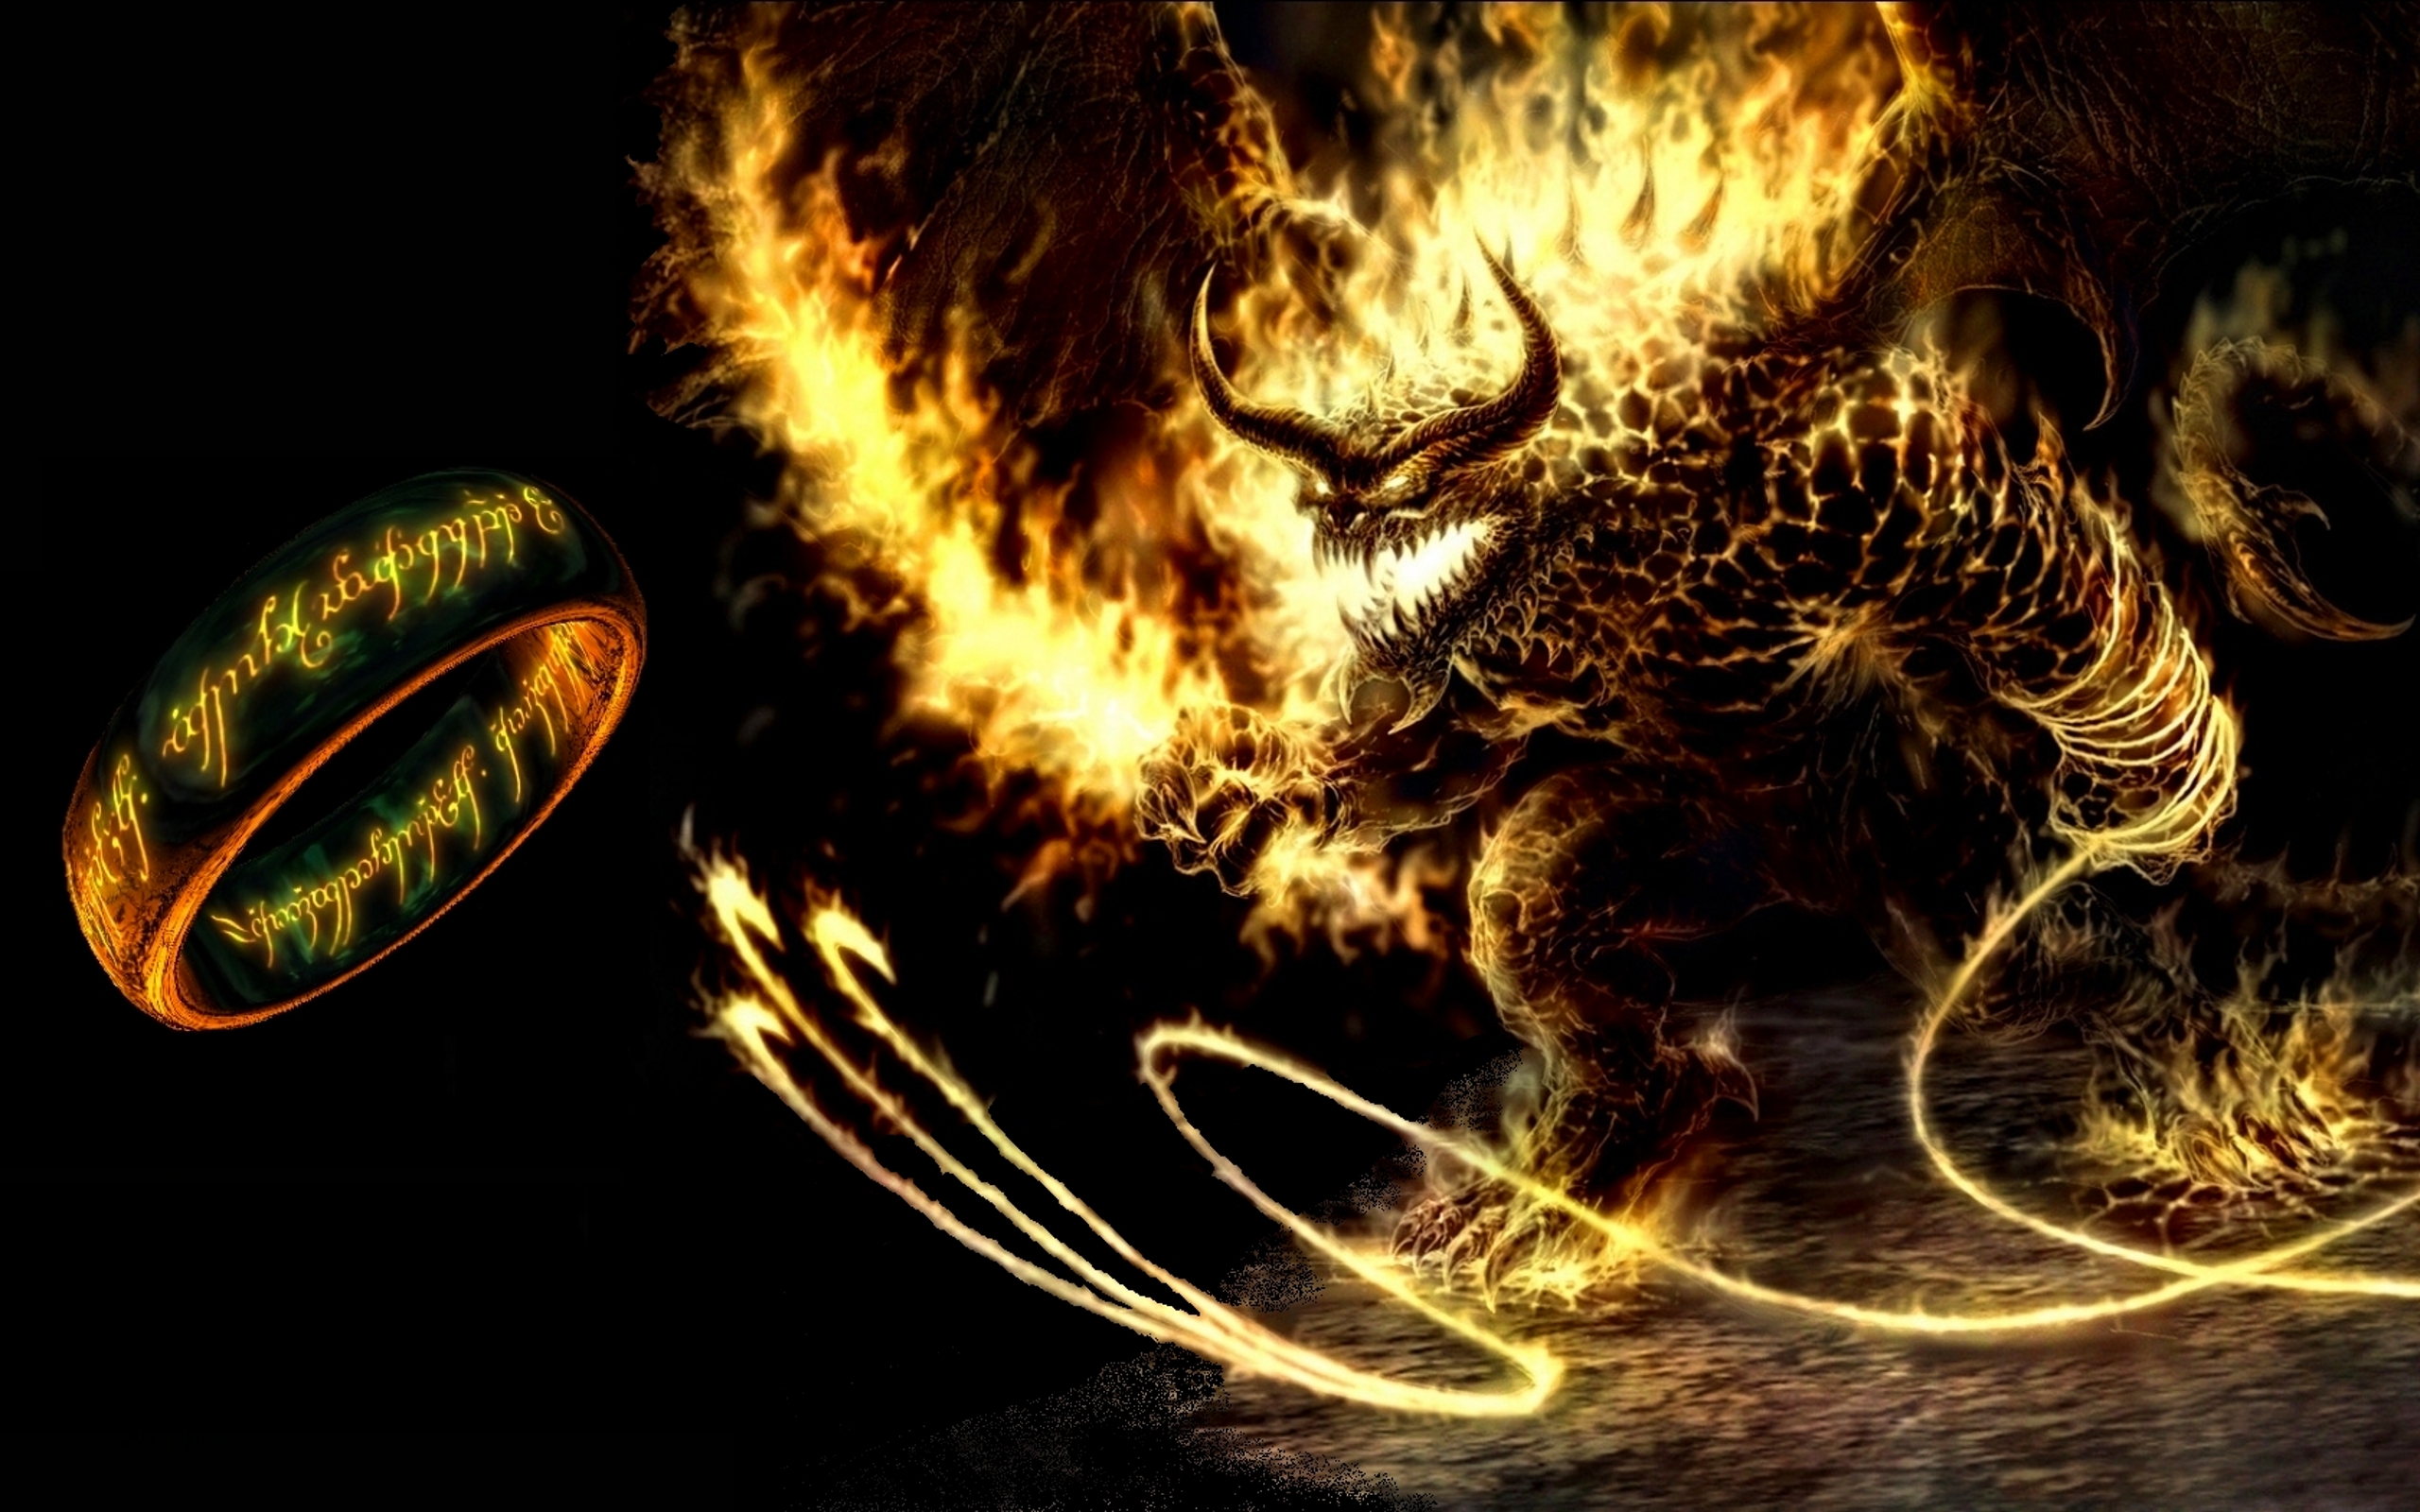 Flaming Balrog from Lord of the Rings wallpaper.